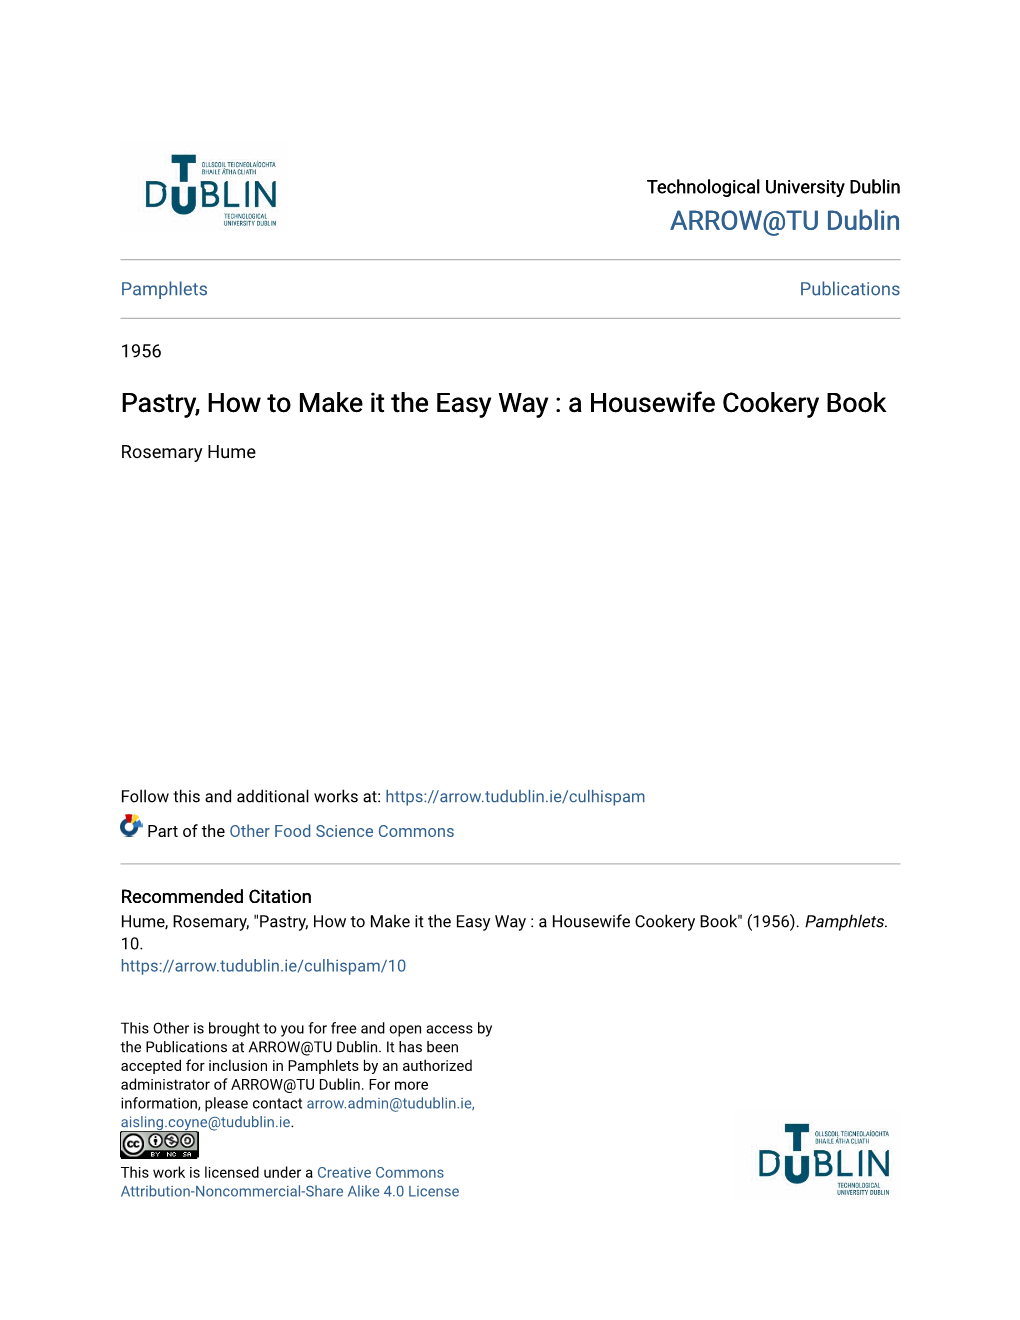 Pastry, How to Make It the Easy Way : a Housewife Cookery Book